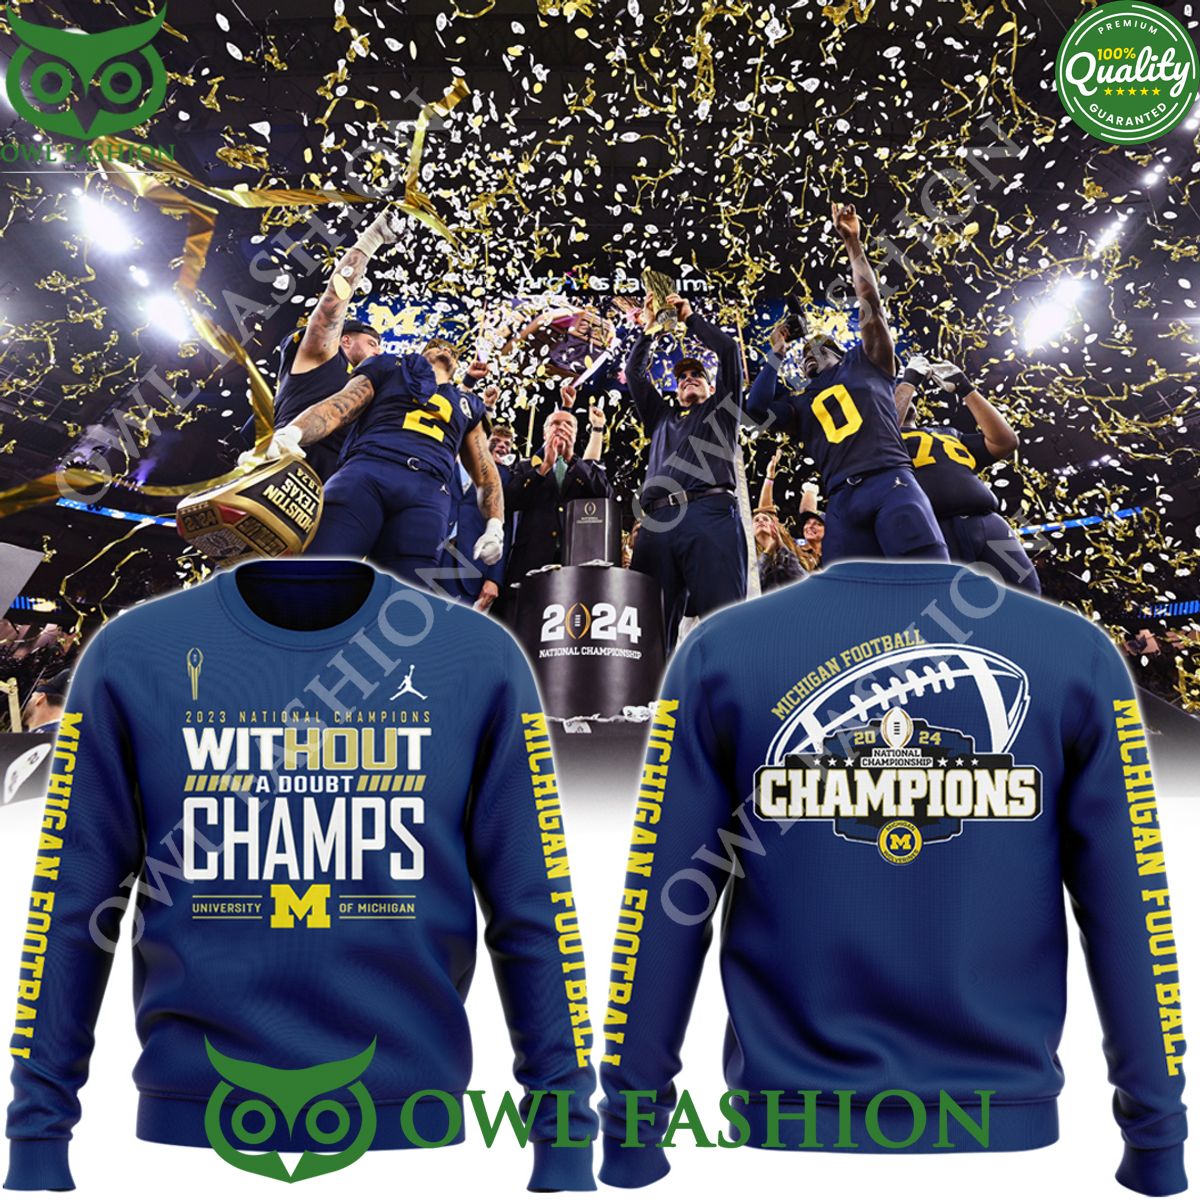 Michigan Wolverines football NATIONAL CHAMPIONSHIP 2024 without a doubt Sweatshirt Owl Fashion